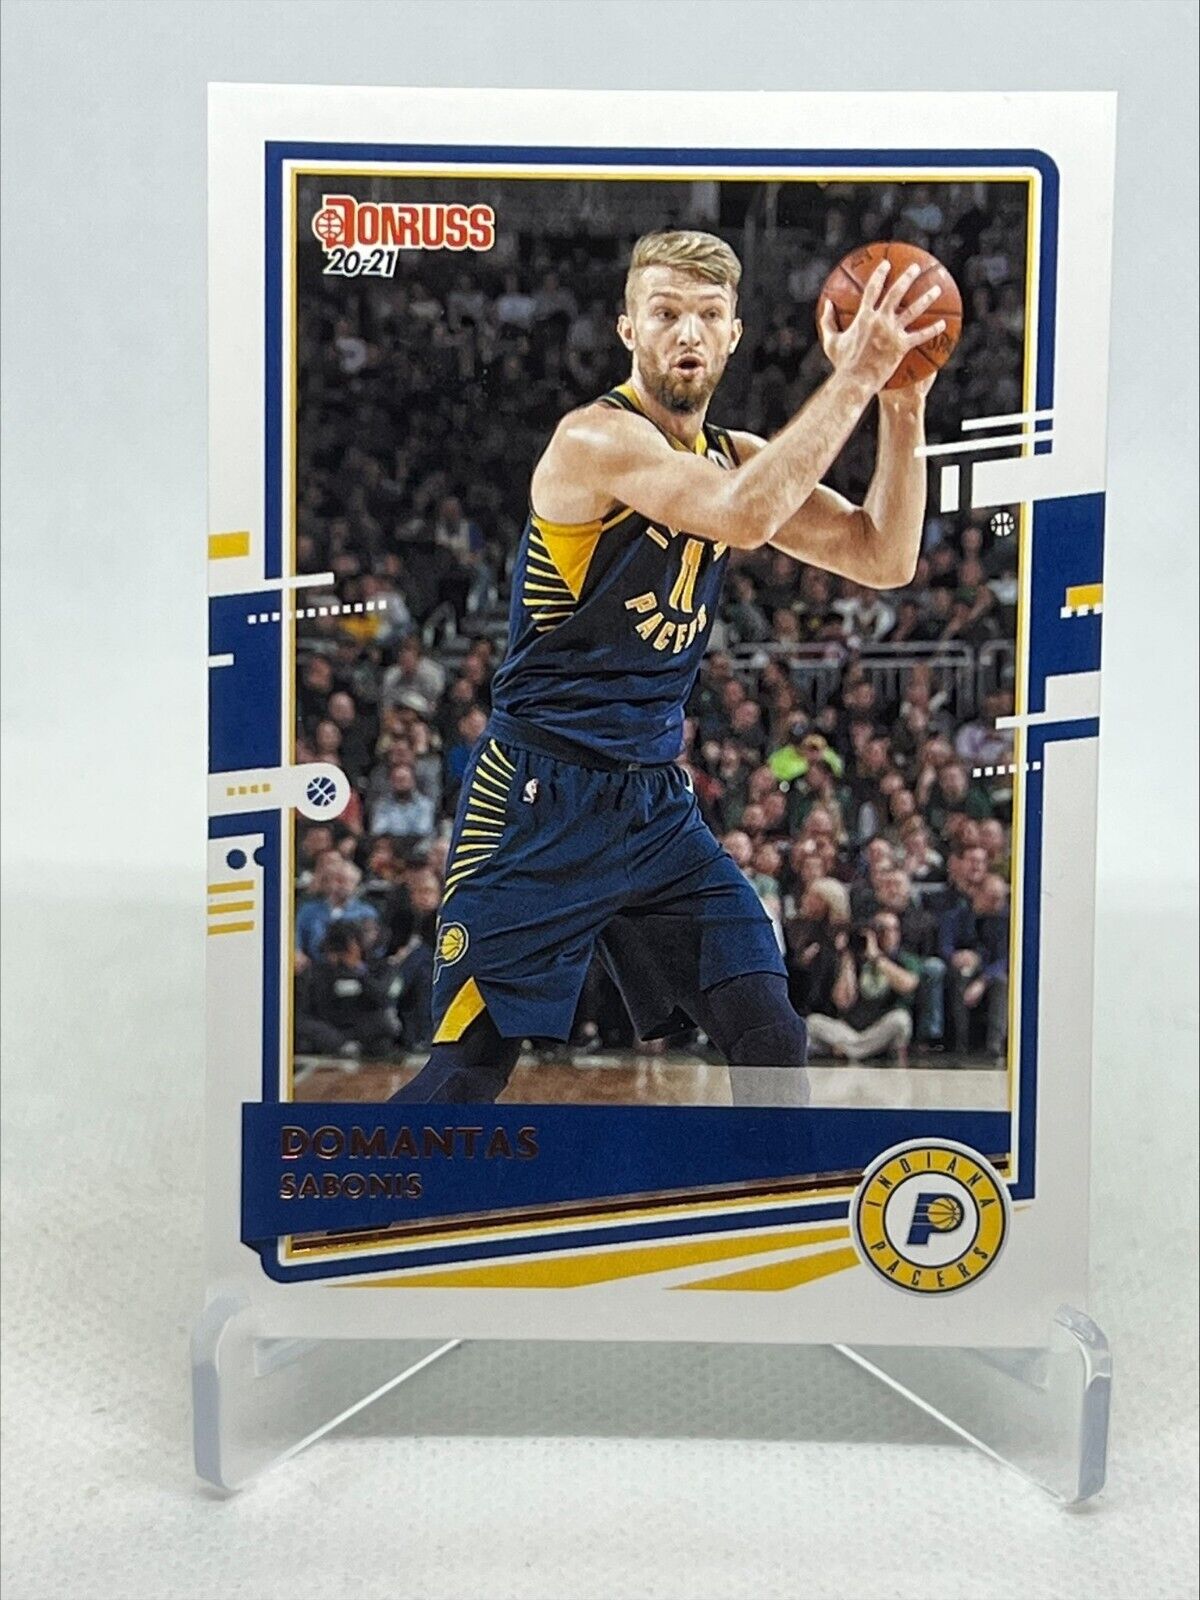 Basketball Trading Card Search - Custom Results Showing Many 